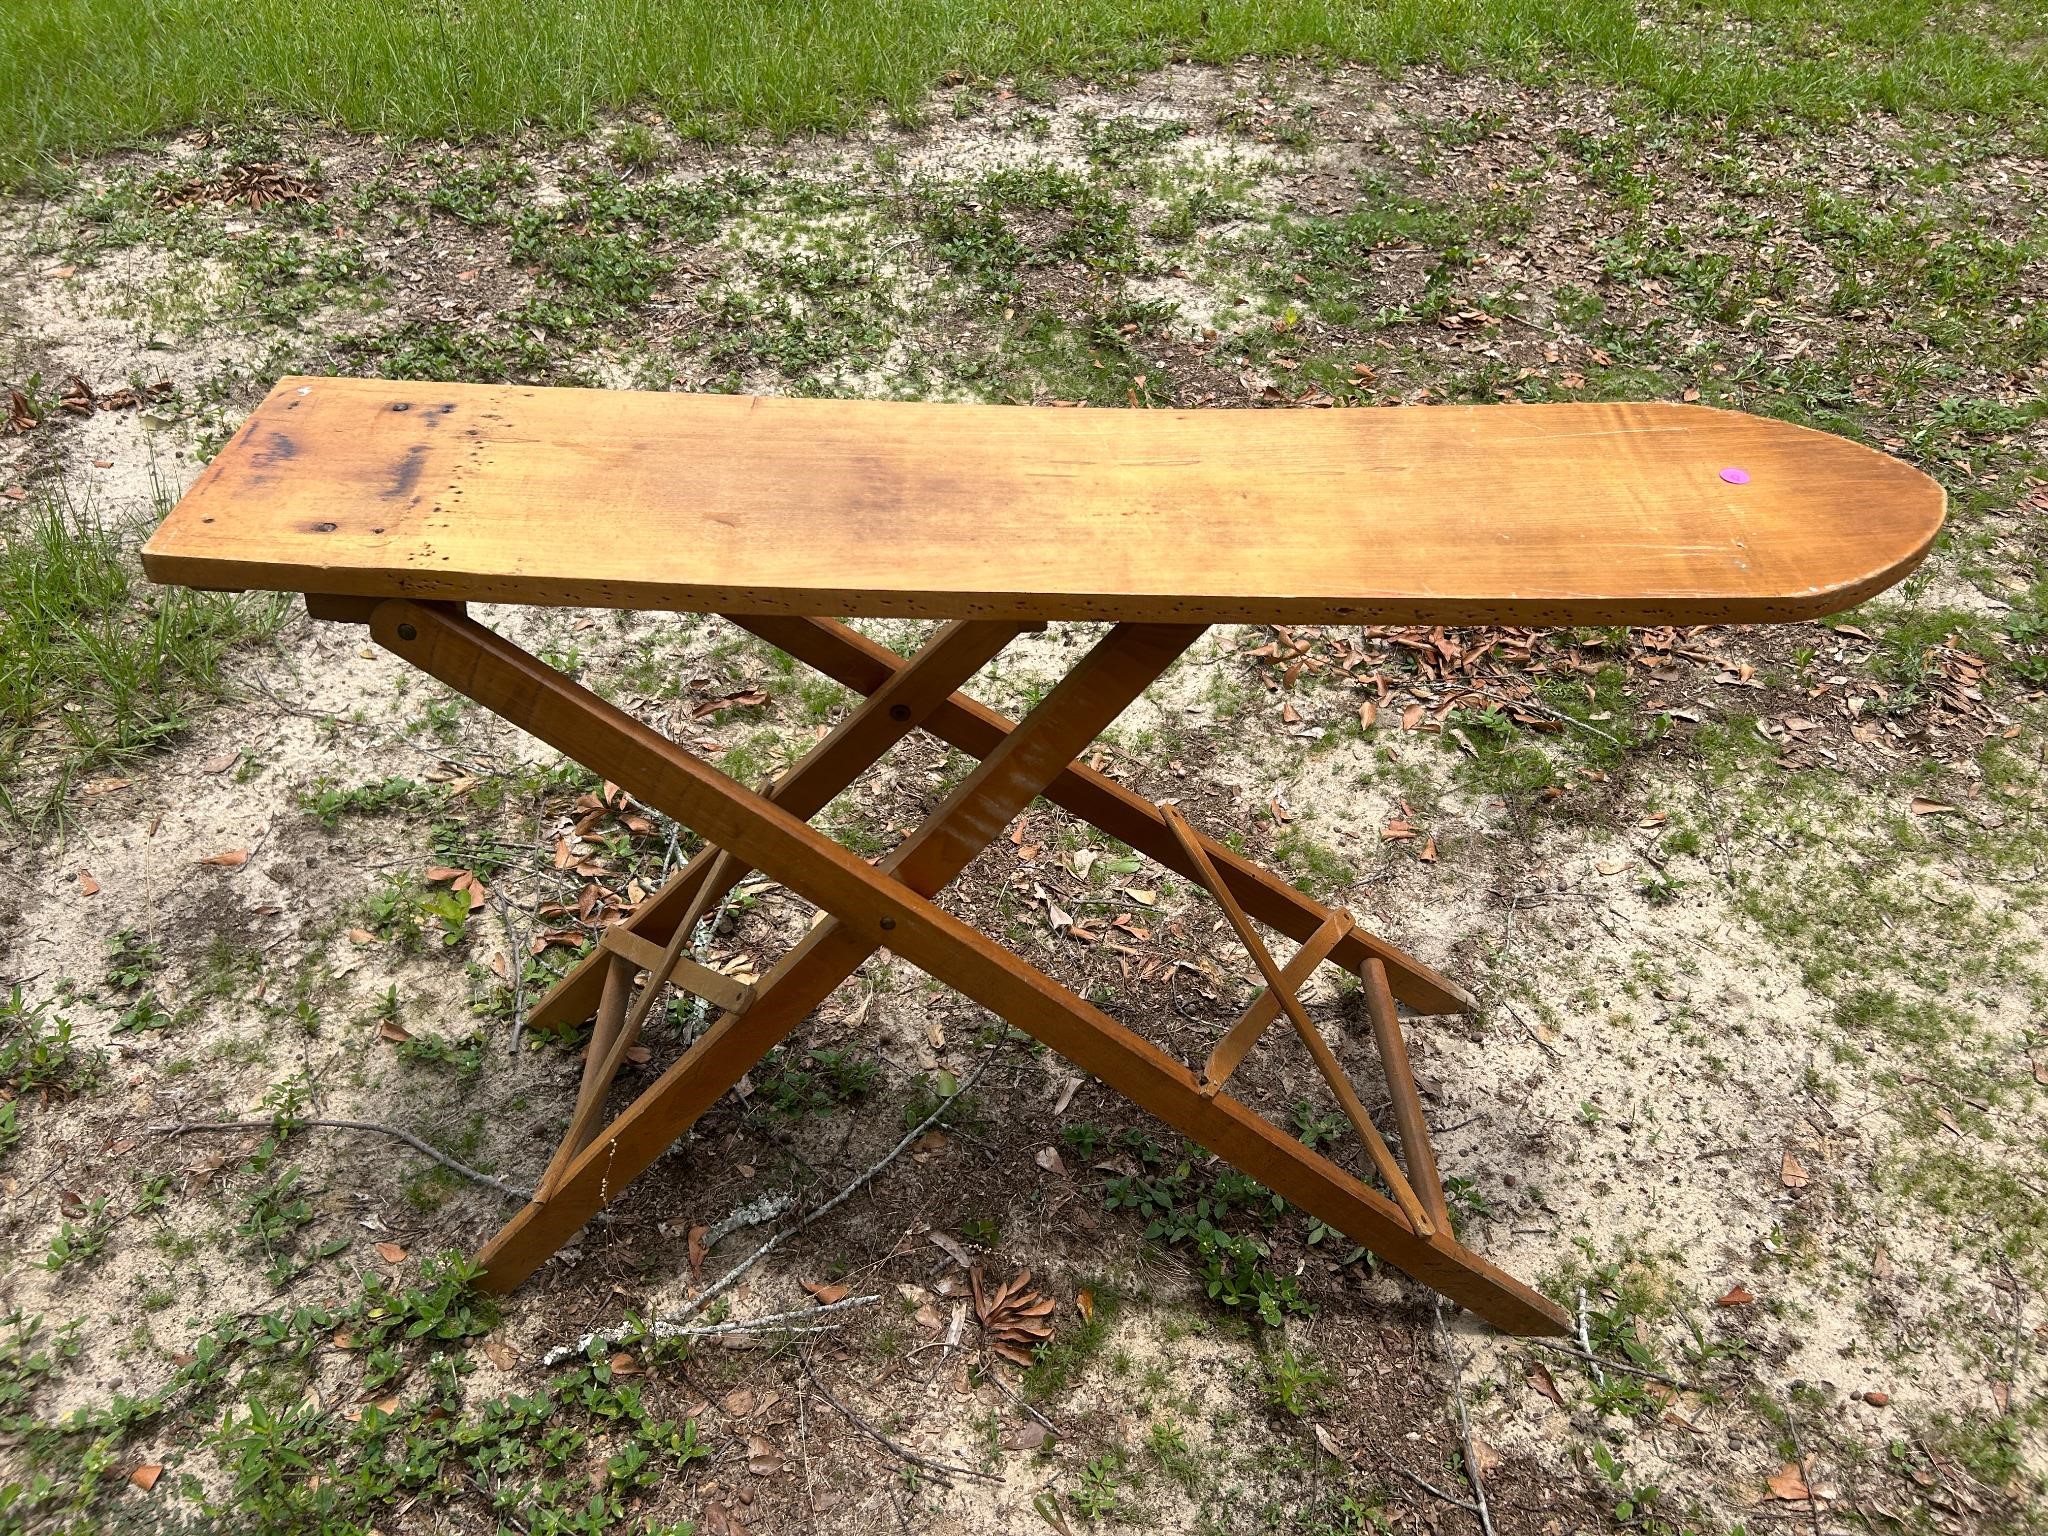 Antique Wooden Ironing Board, collapsible